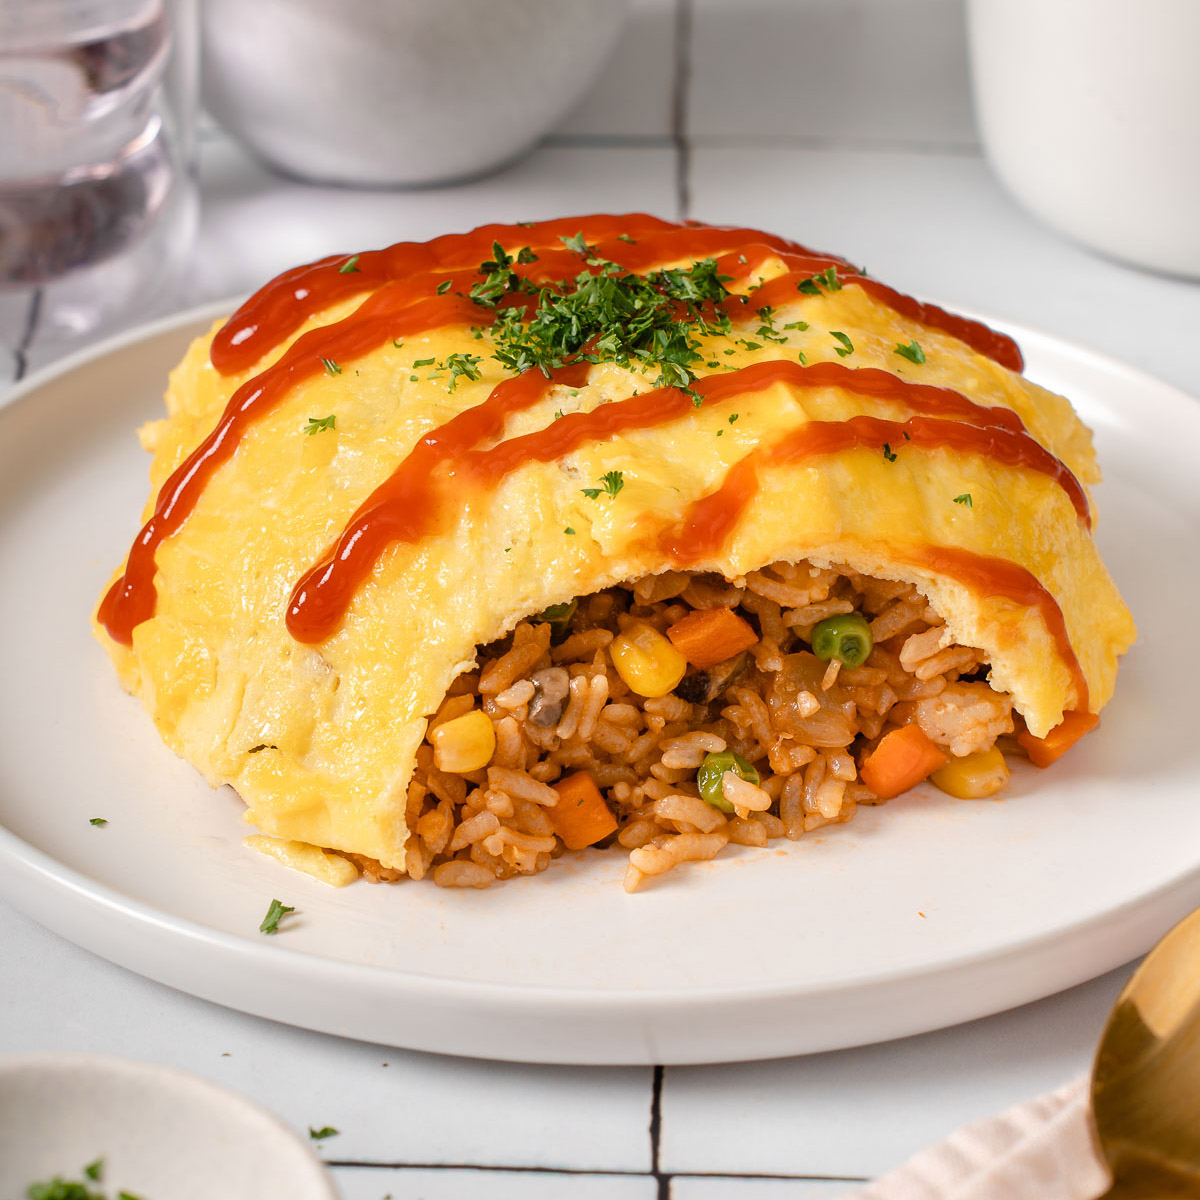 Up close with a plate of omurice cut open to show the fried rice inside.